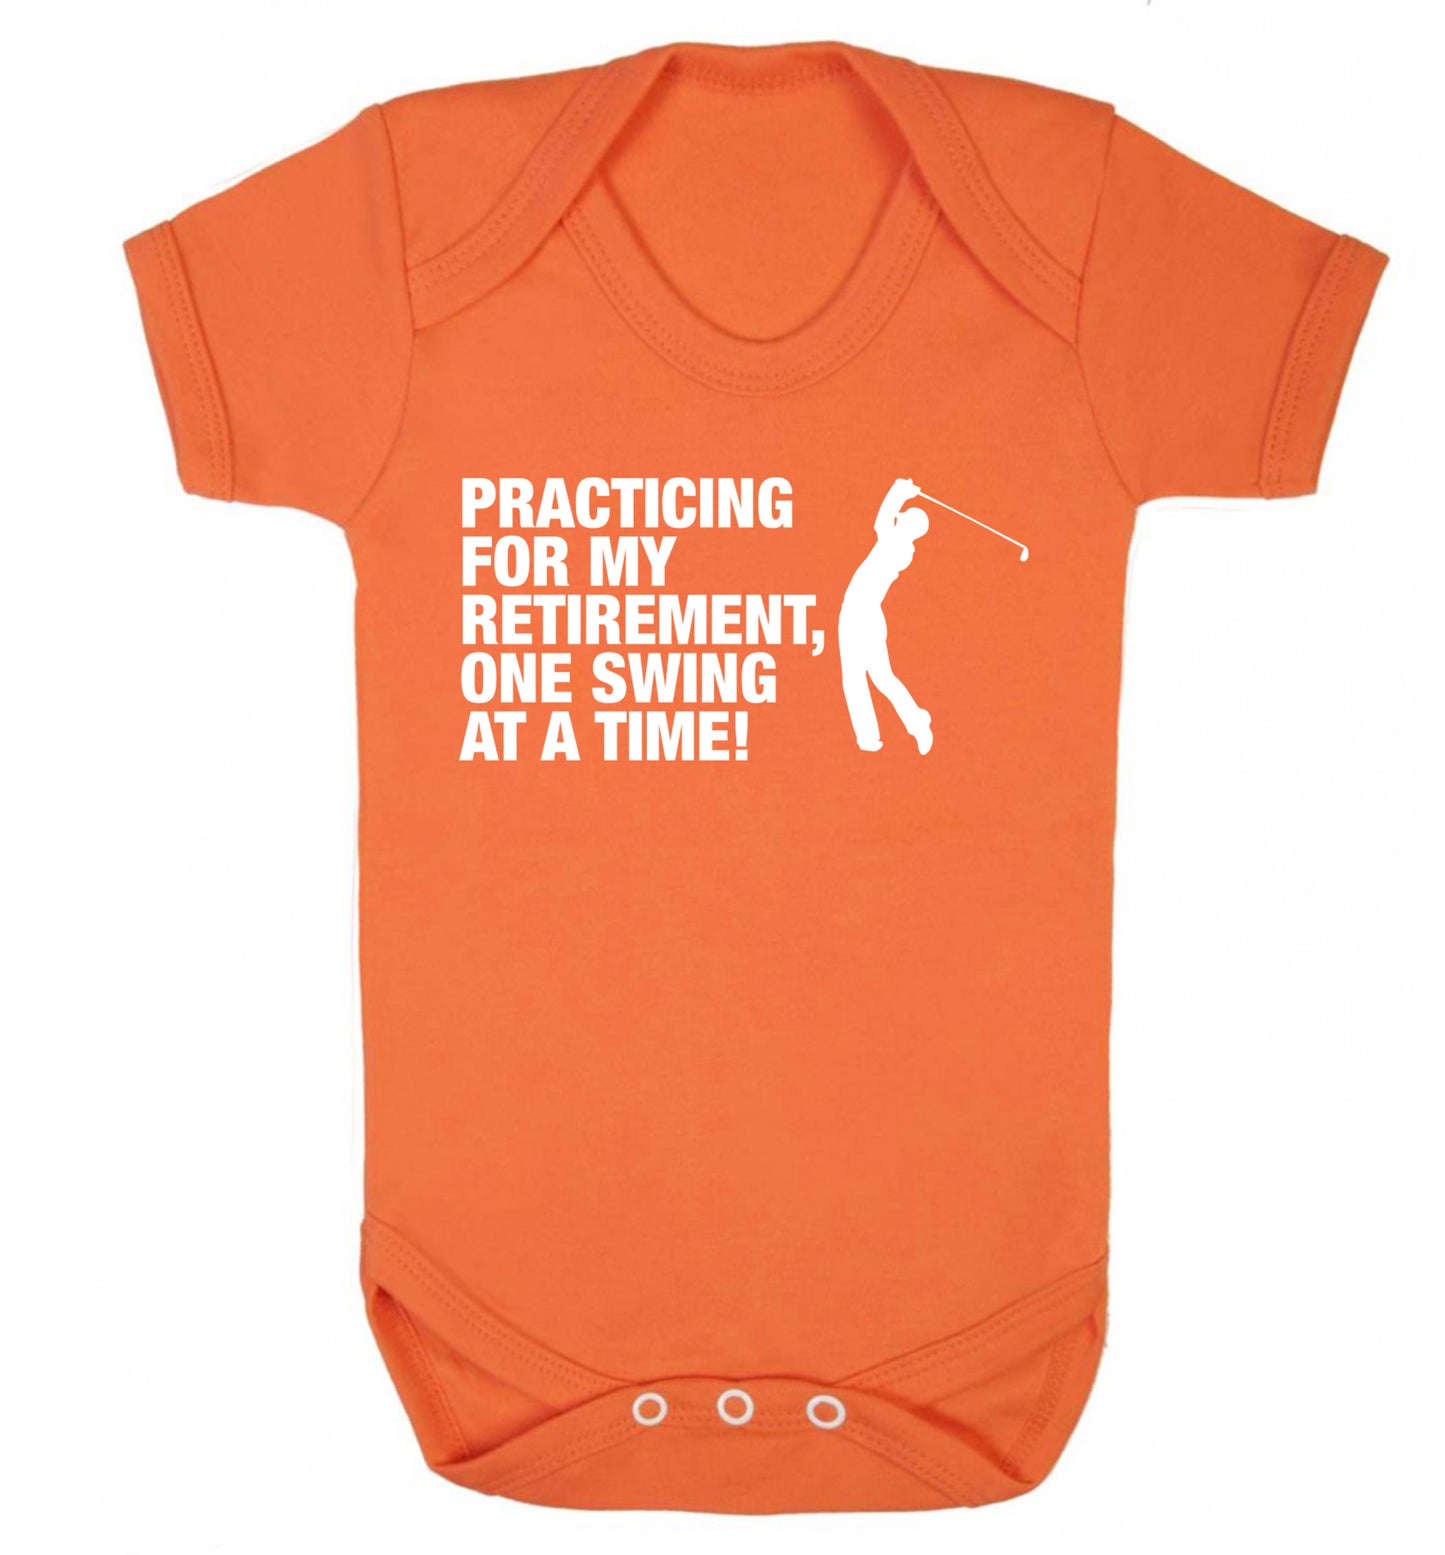 Practicing for my retirement one swing at a time Baby Vest orange 18-24 months